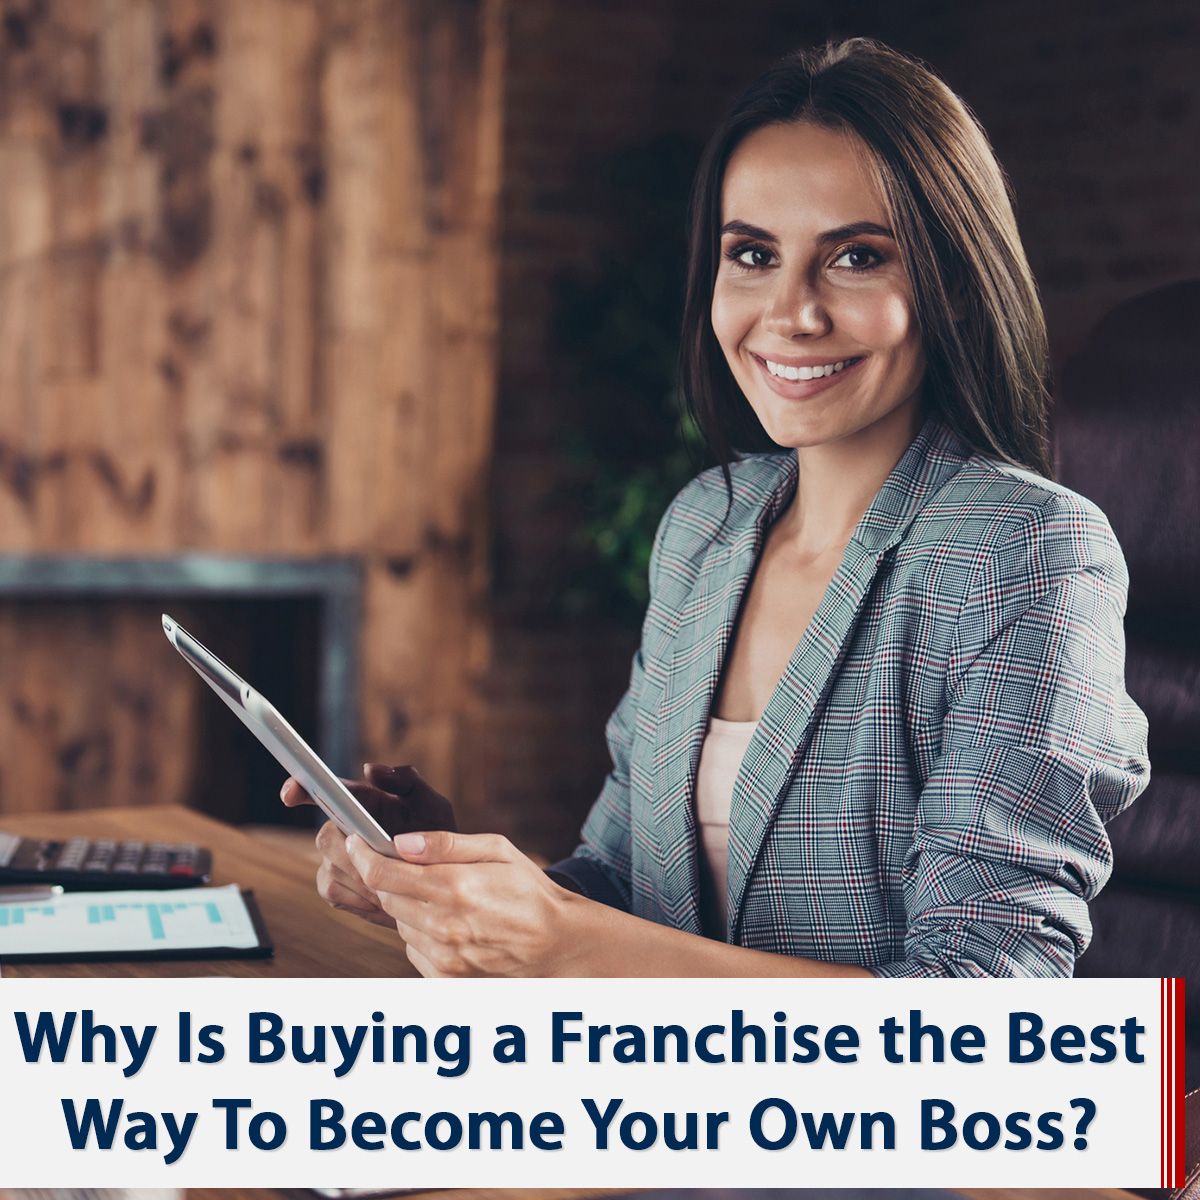 Why Is Buying a Franchise the Best Way To Become Your Own Boss?